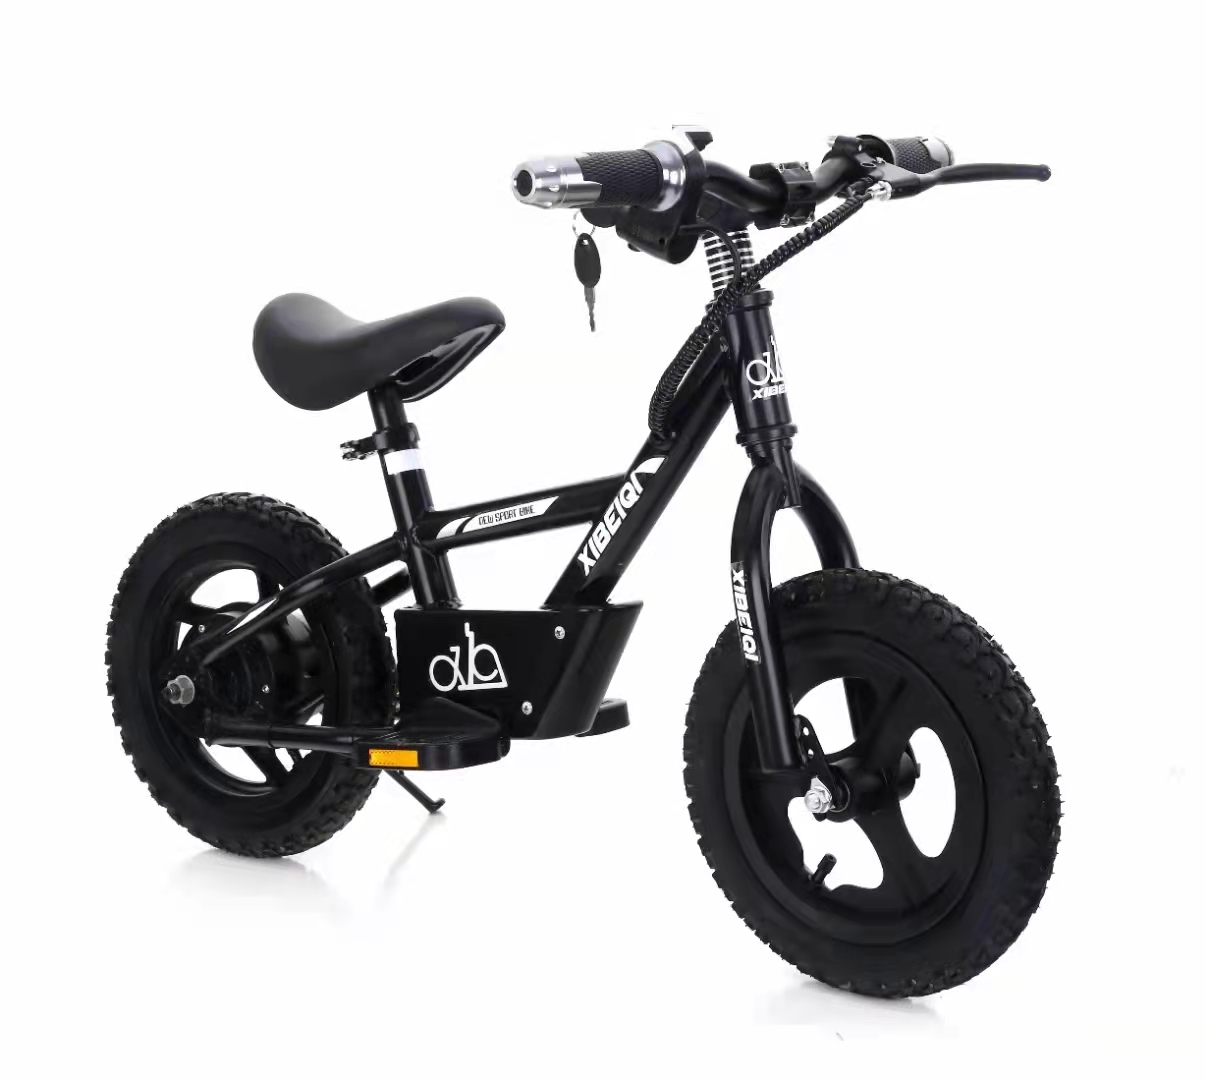 China Manufacturer/ Wholesales Price/ 12 inch Bike/Factory Price Featured Image